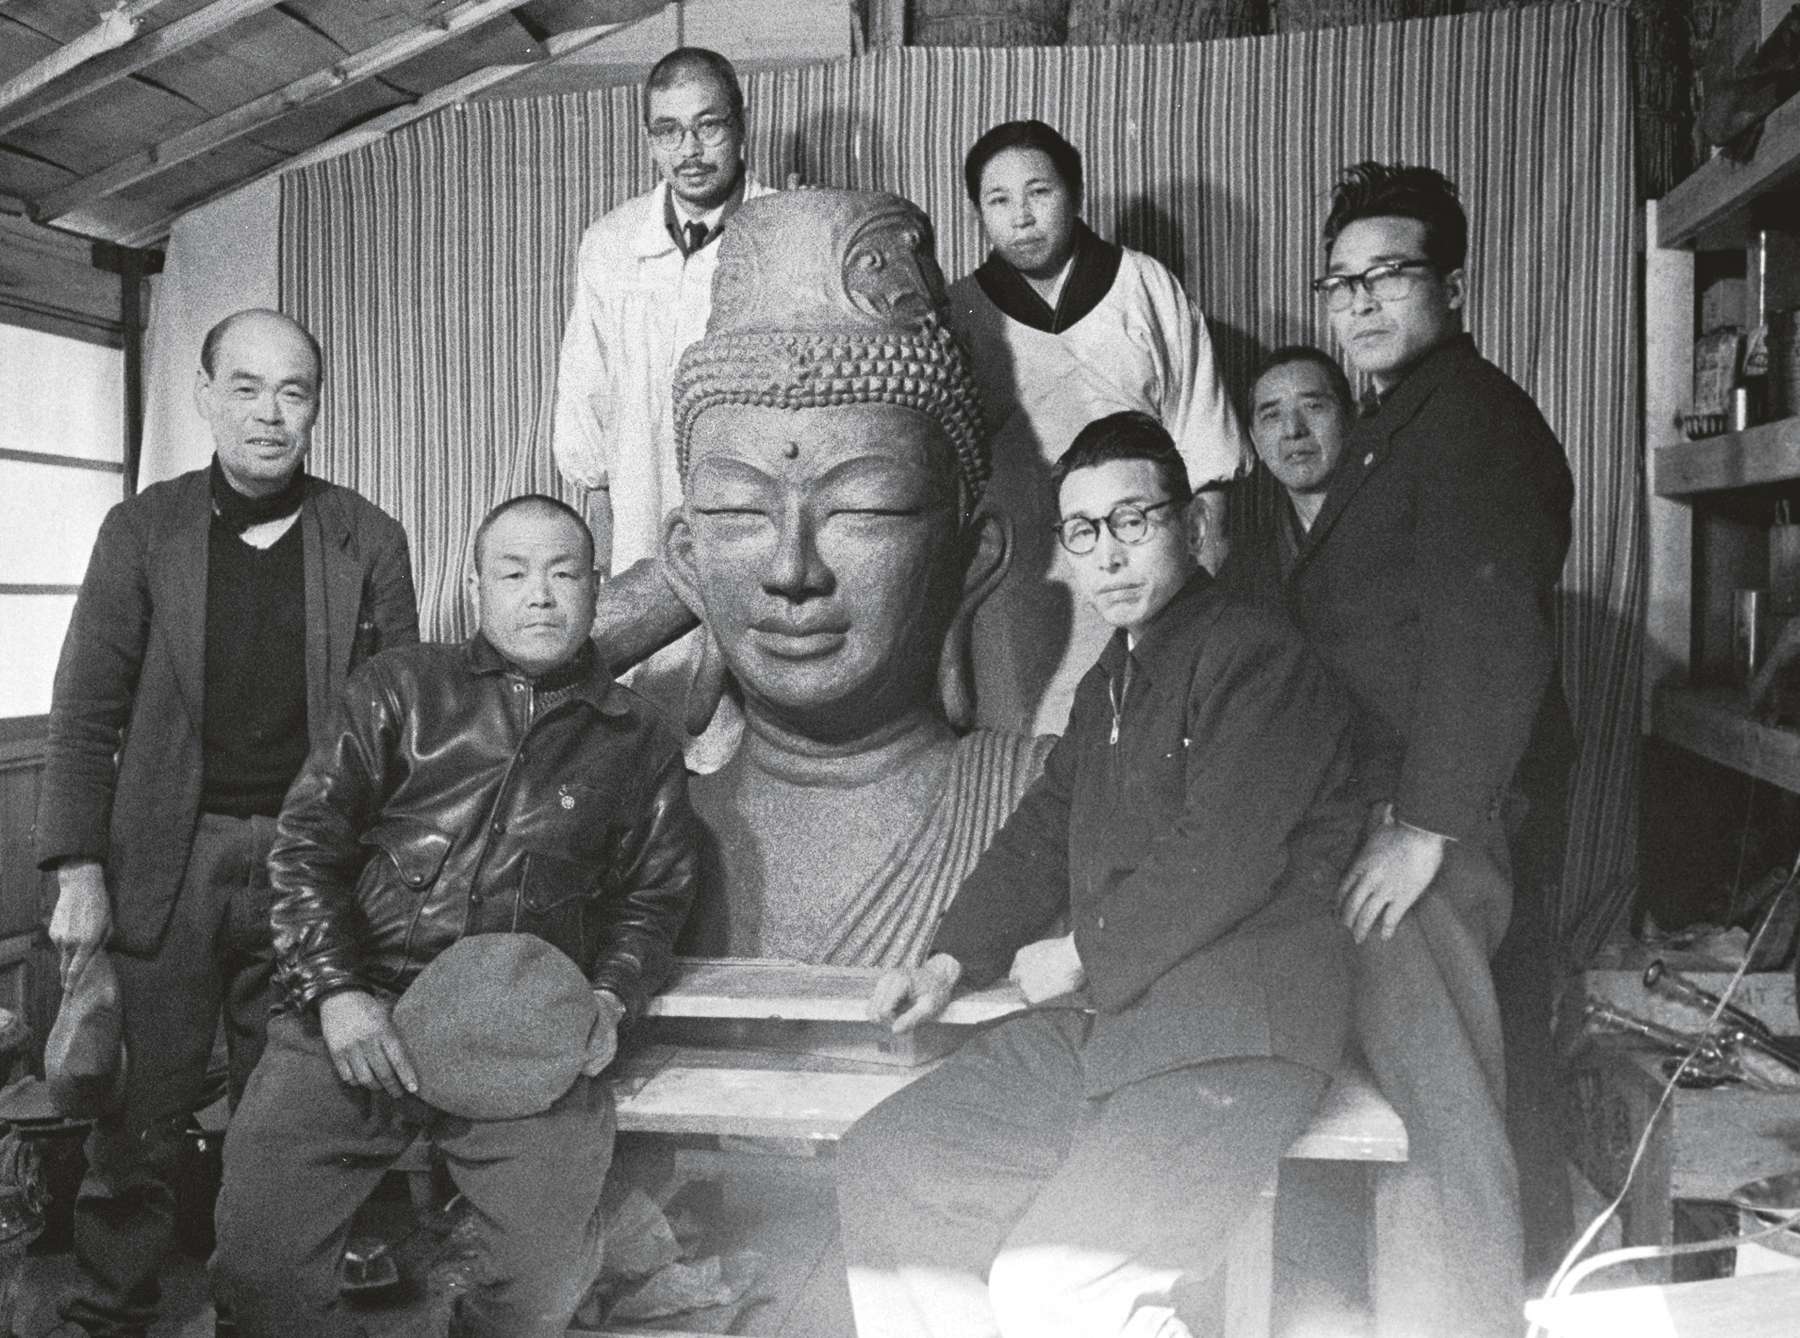 Shinjo and Tomoji, both wearing smocks over their clothing, stand in a studio behind a large sculpted bust of a smiling buddha, with a group of five men, dressed in lay clothes, arranged in front.